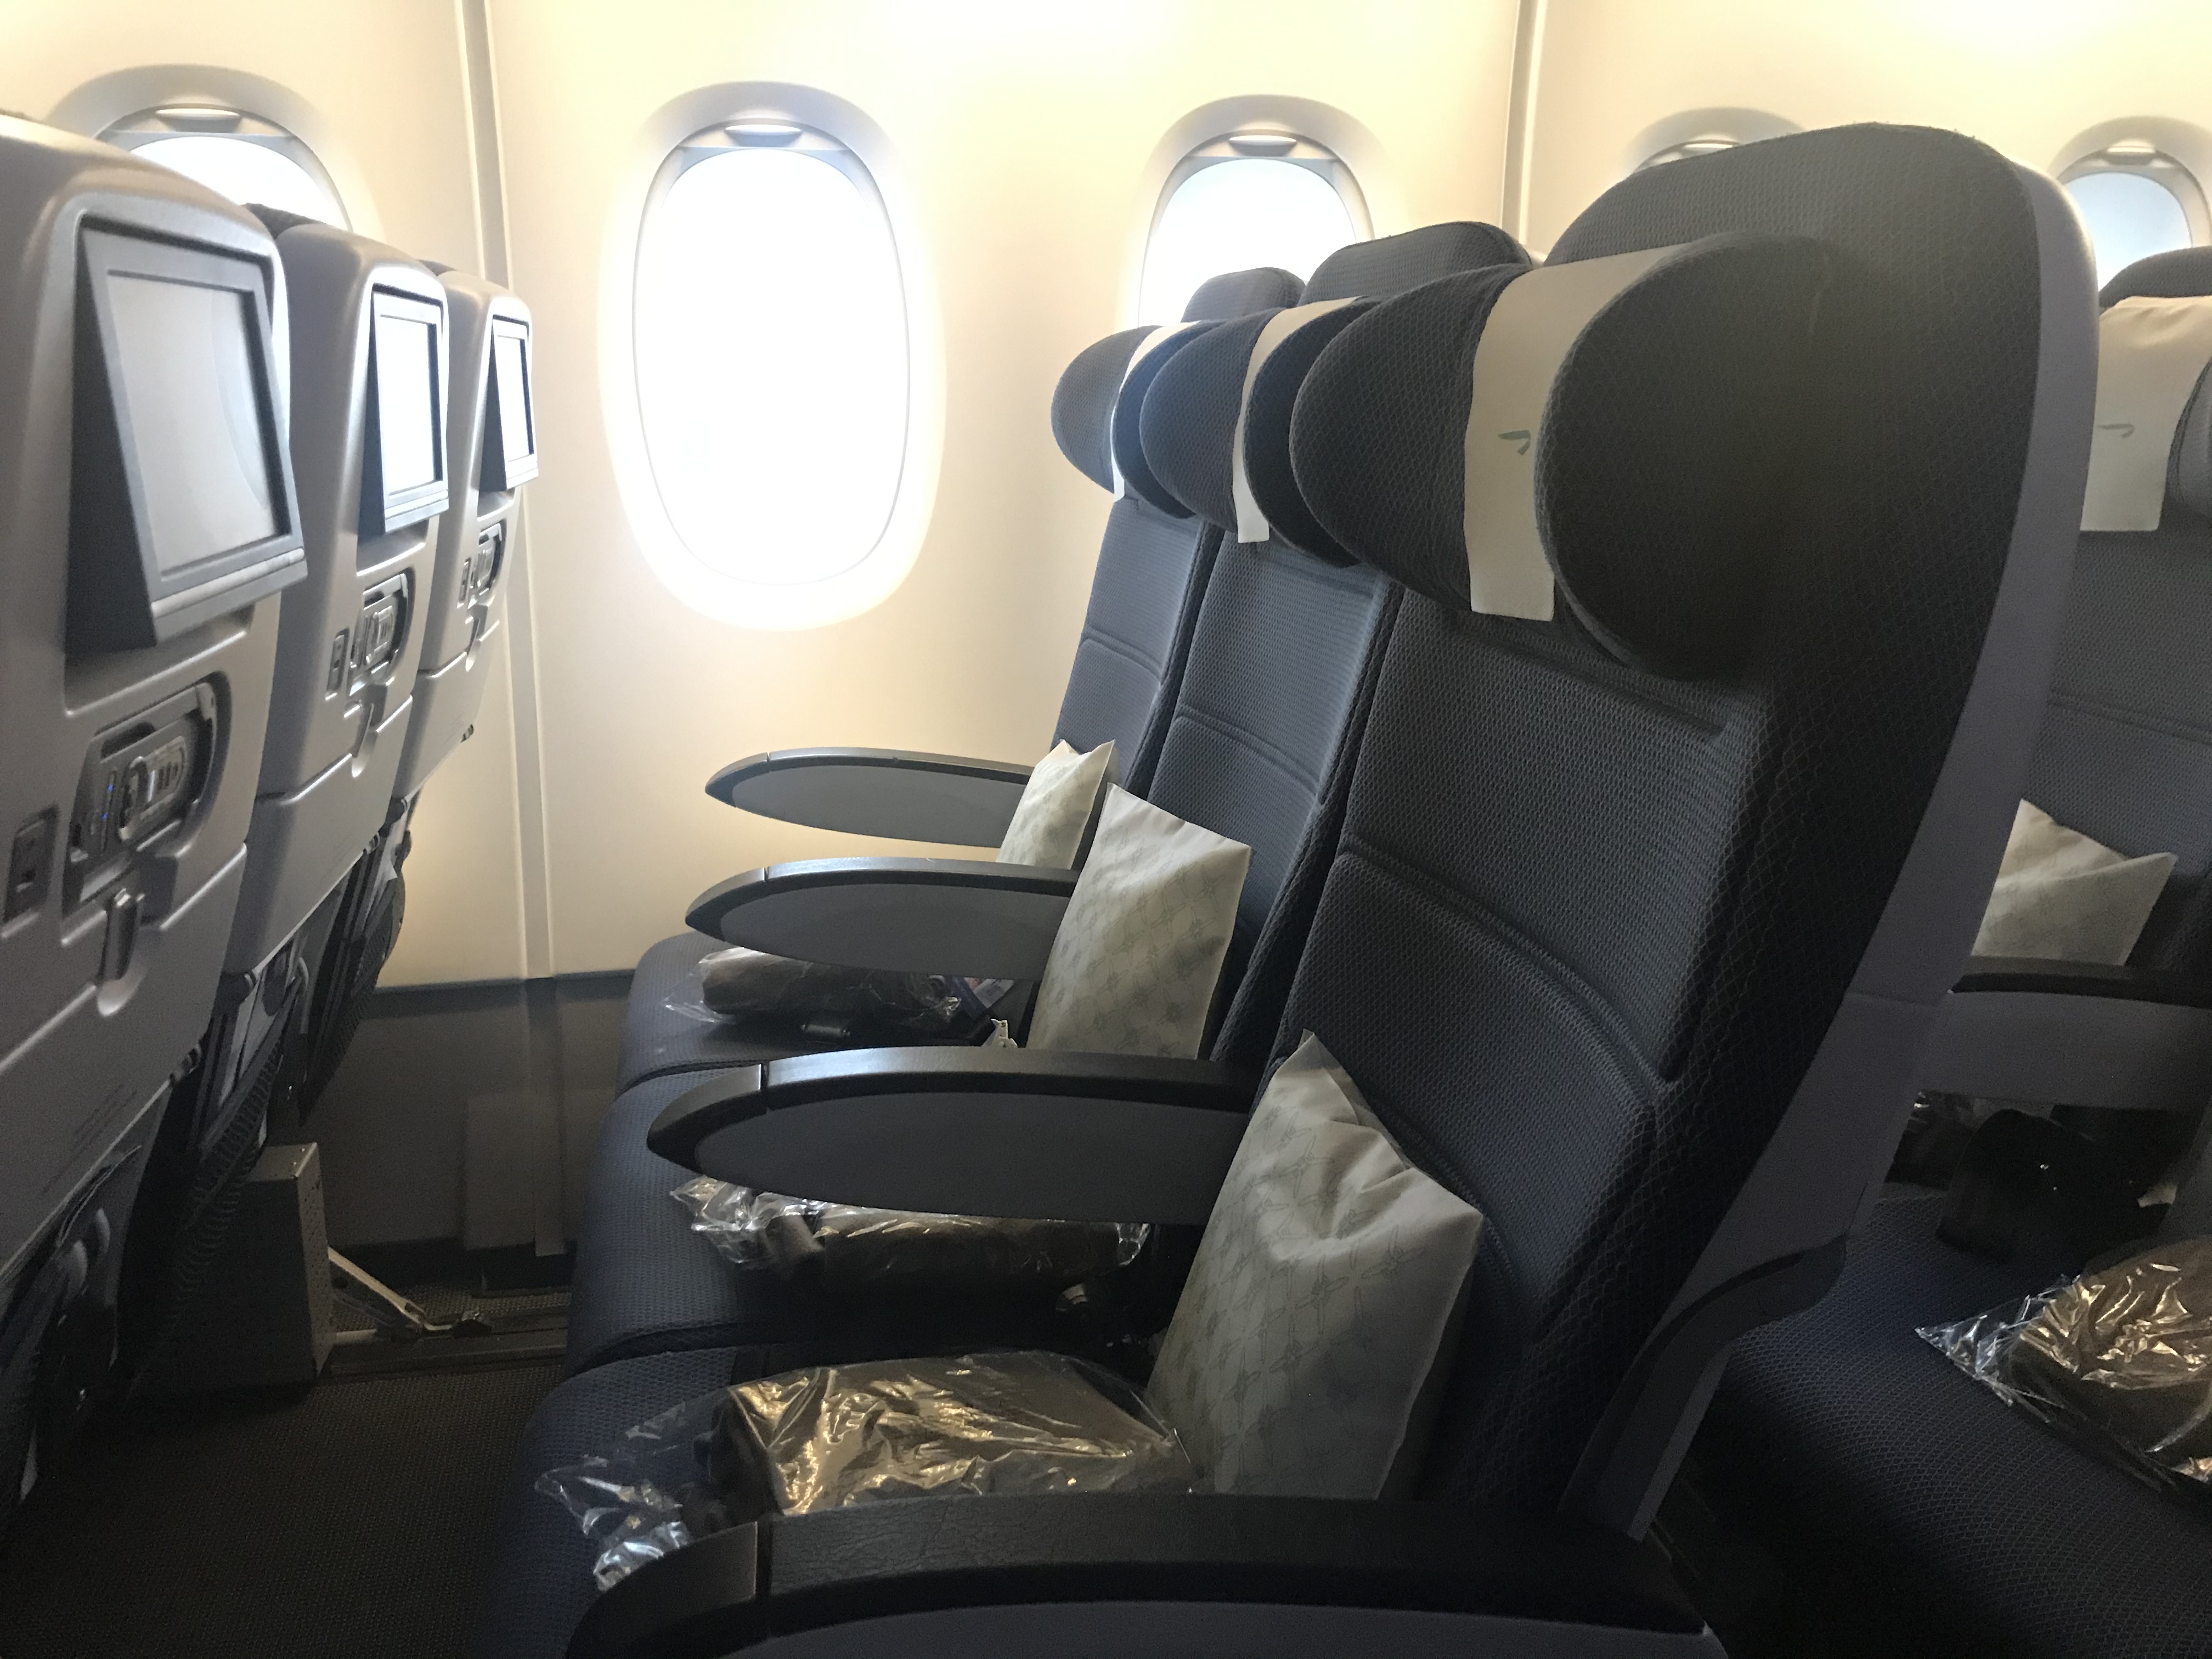 Does BA allow larger inflatable pillows like these? : r/BritishAirways